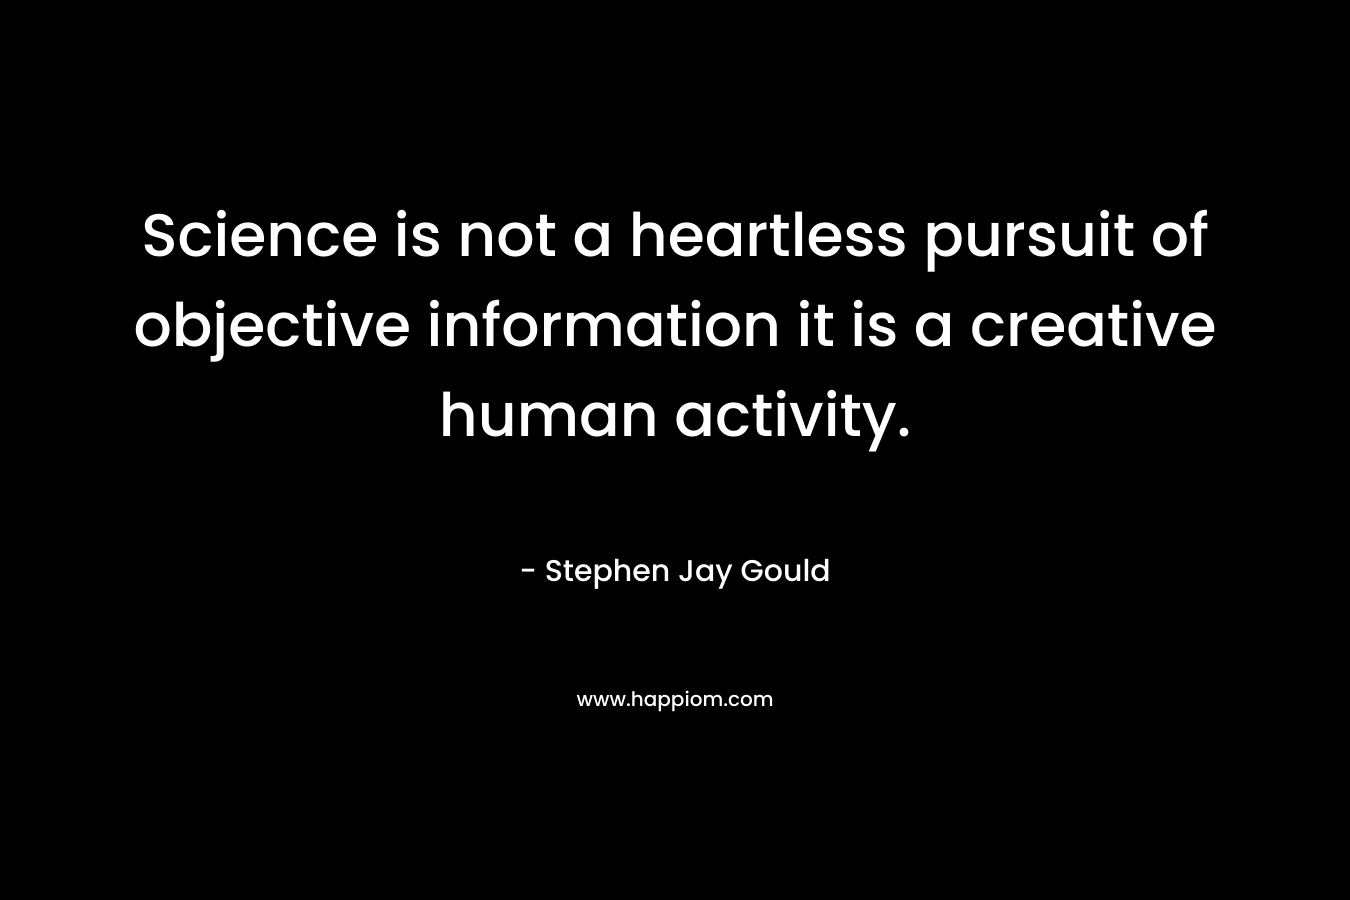 Science is not a heartless pursuit of objective information it is a creative human activity.